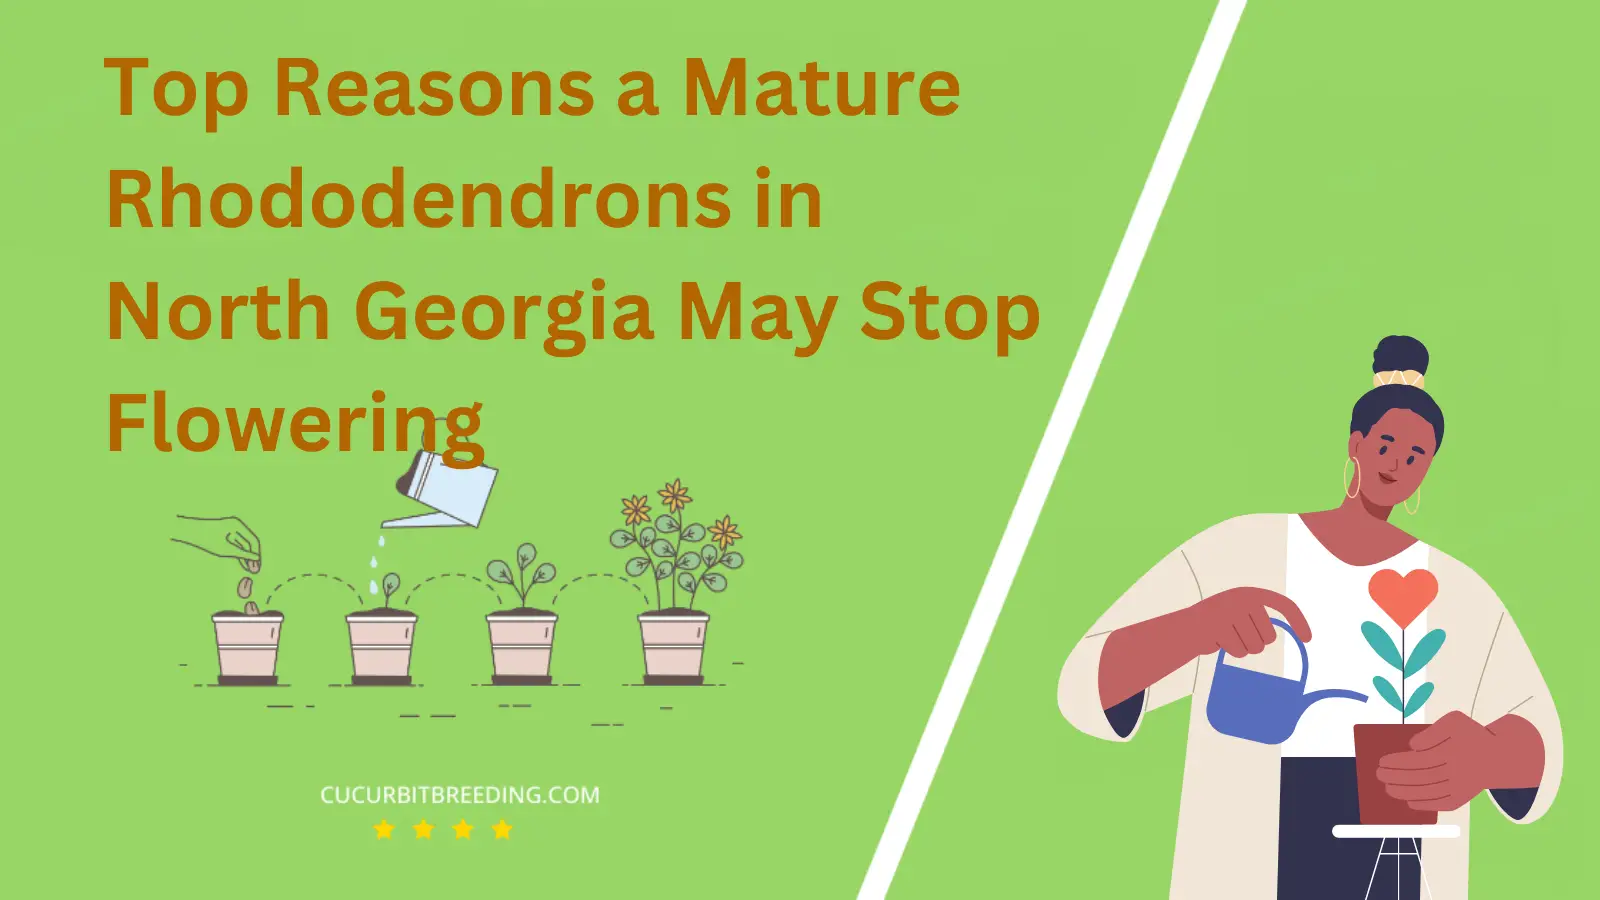 Top Reasons a Mature Rhododendrons in North Georgia May Stop Flowering